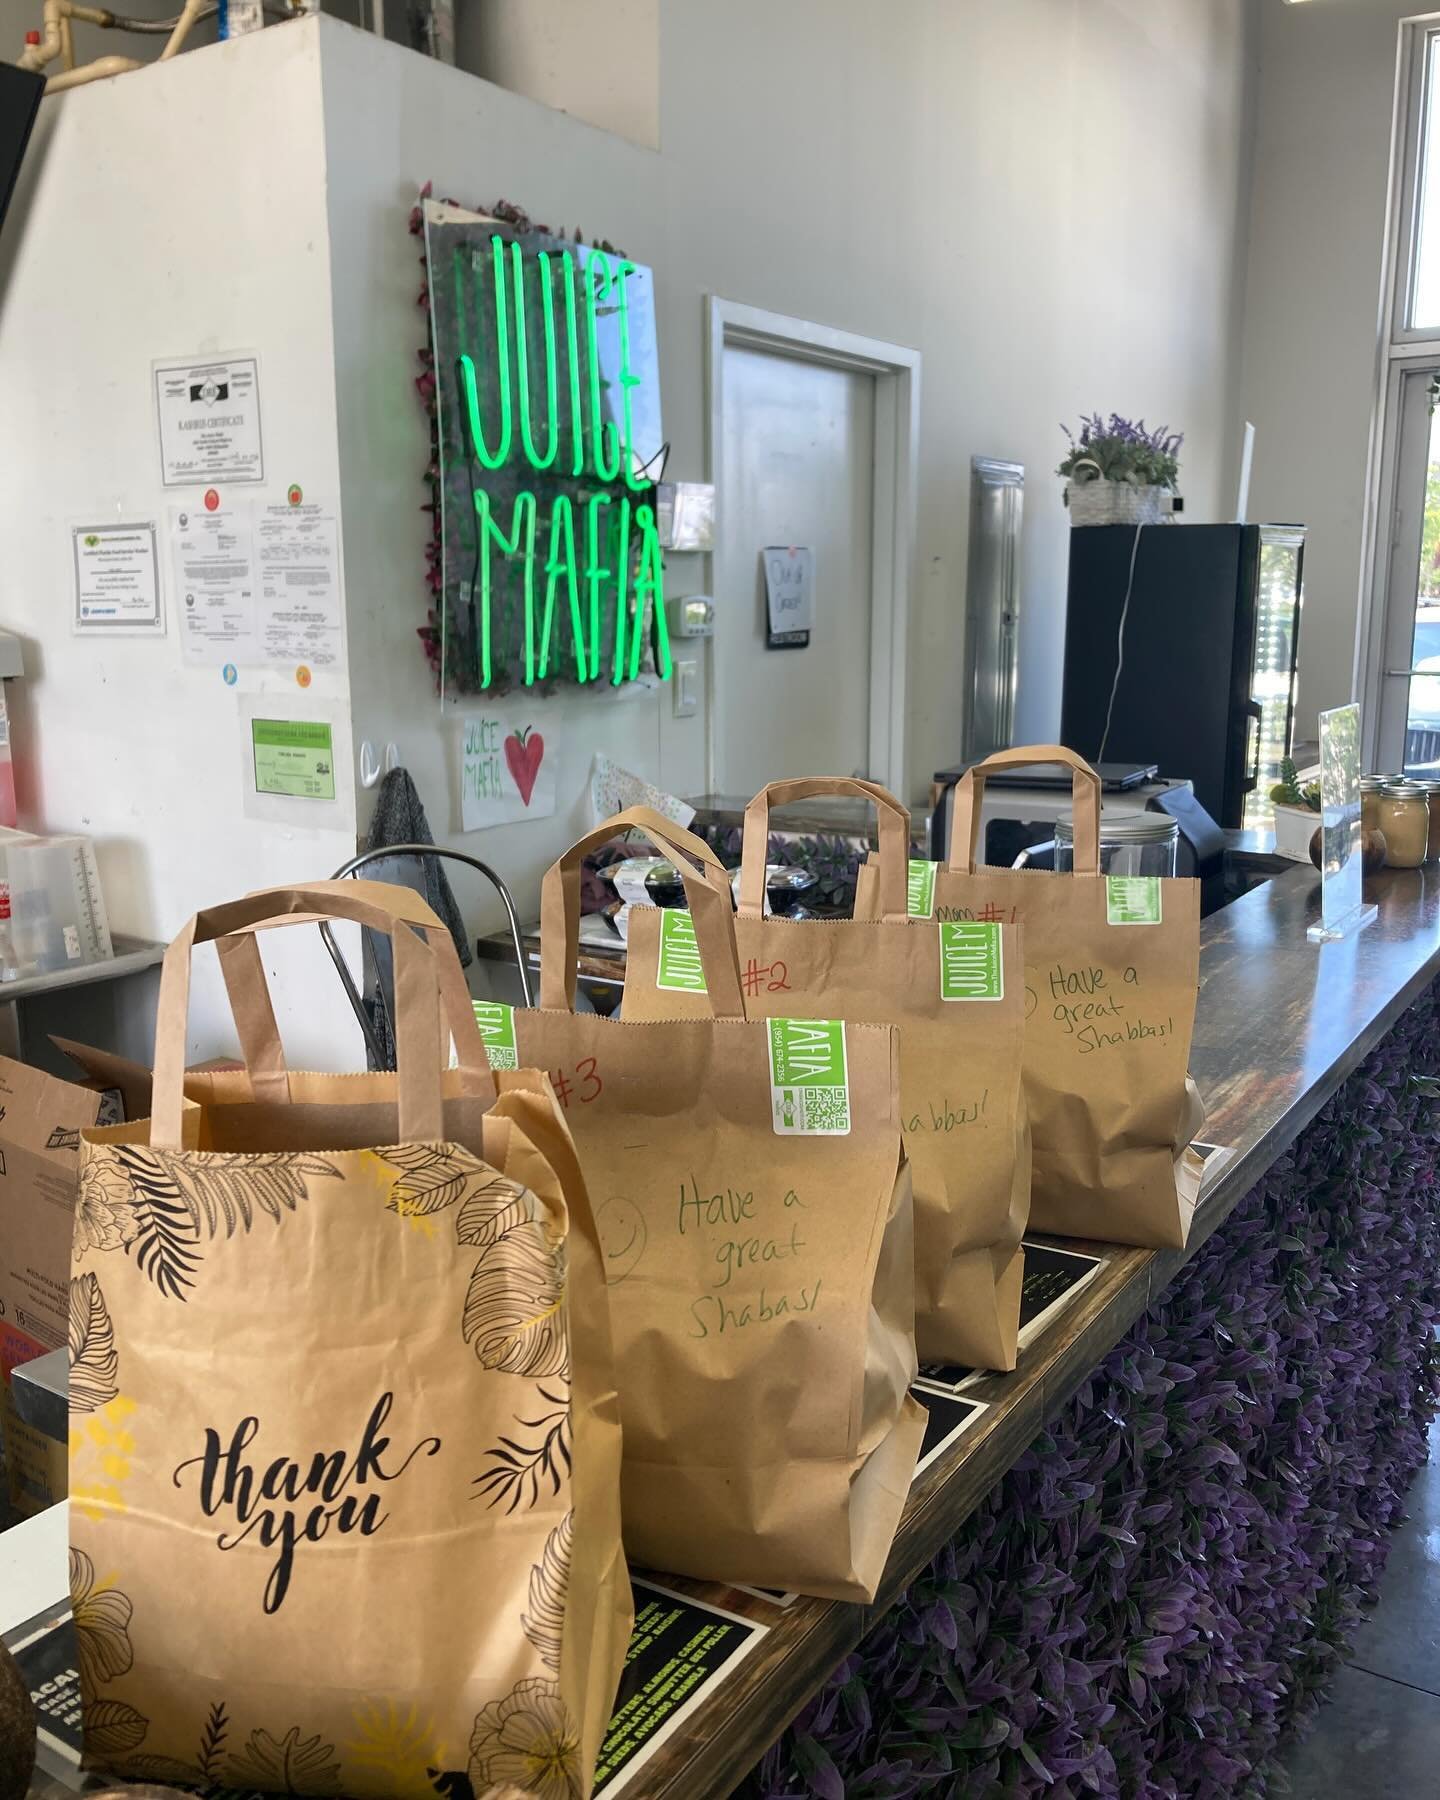 Family wellness packages going out this morning! 

What better way to start off the work week that ensuring everyone in the house has easy, delicious, healthy options to choose from? 

All of our family wellness packages are customized to meet the ne